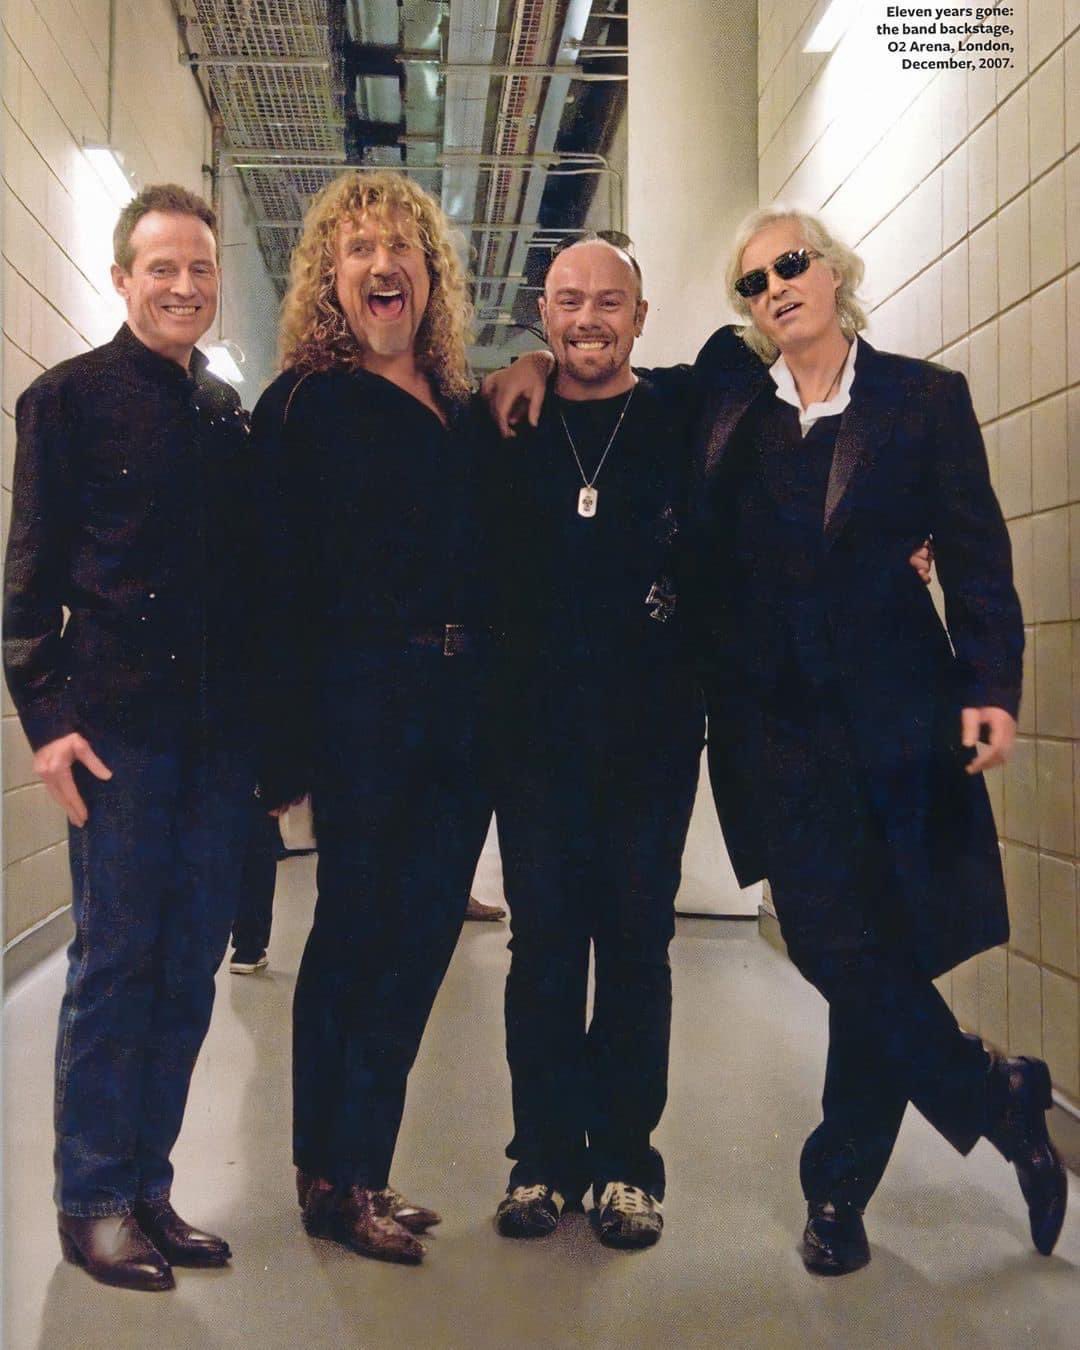 Primarily_Prog (Phil to you) on Twitter: "Led Zeppelin, moments before going on stage at Ahmet Ertegun Tribute Concert the O2 Arena in December 2007. https://t.co/3gMrBam6Ir" / Twitter